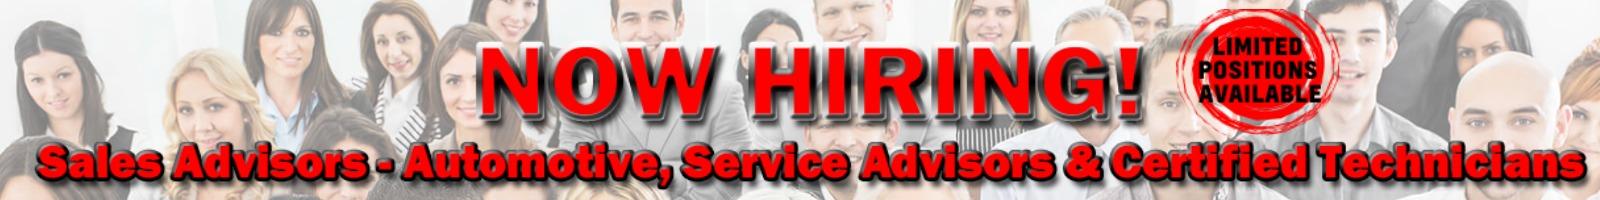 Now Hiring with Limited Positions Available at Tuscaloosa Chevrolet - Openings for Sales Advisors - Automotive, Service Advisors and Certified Technicians near Birmingham, Alabama